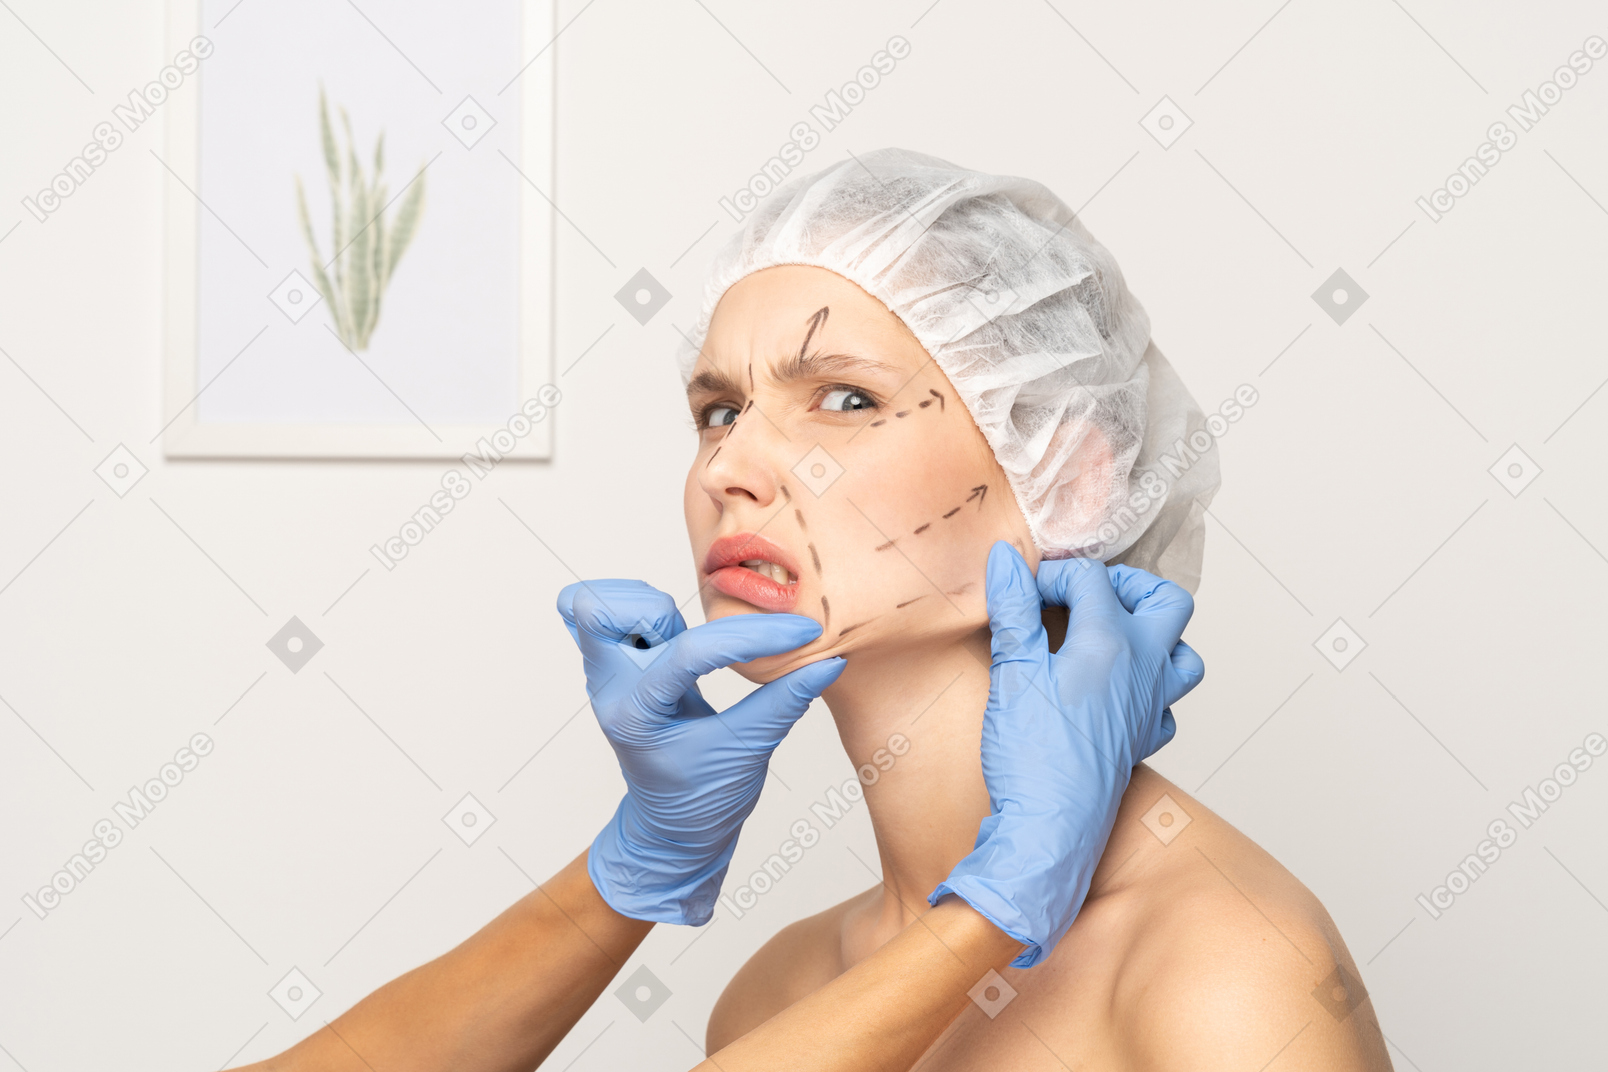 Young woman annoyed at hands pulling her skin